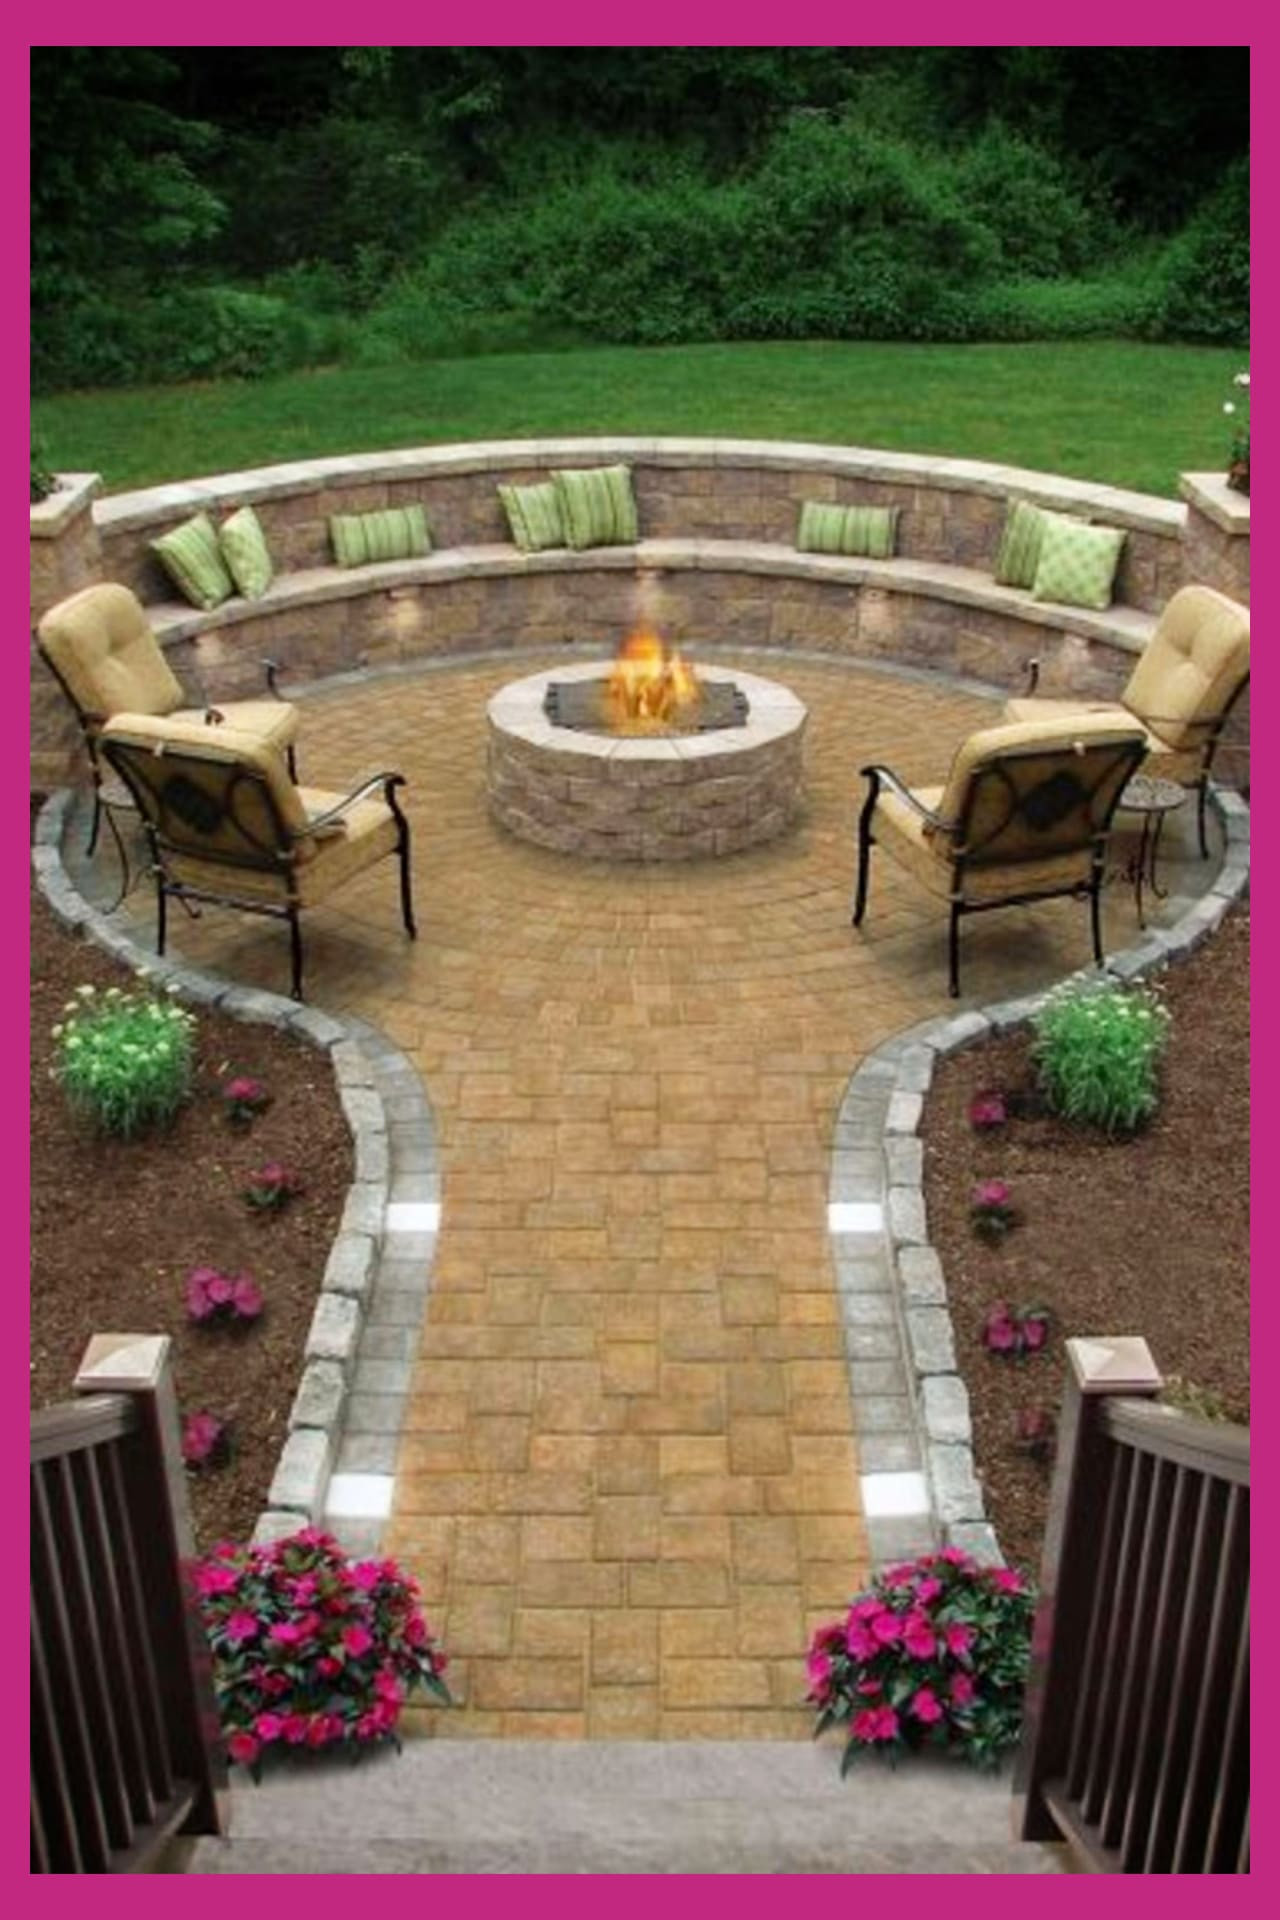 Deck Designs With Fire Pit
 Backyard Fire Pit Ideas and Designs for Your Yard Deck or